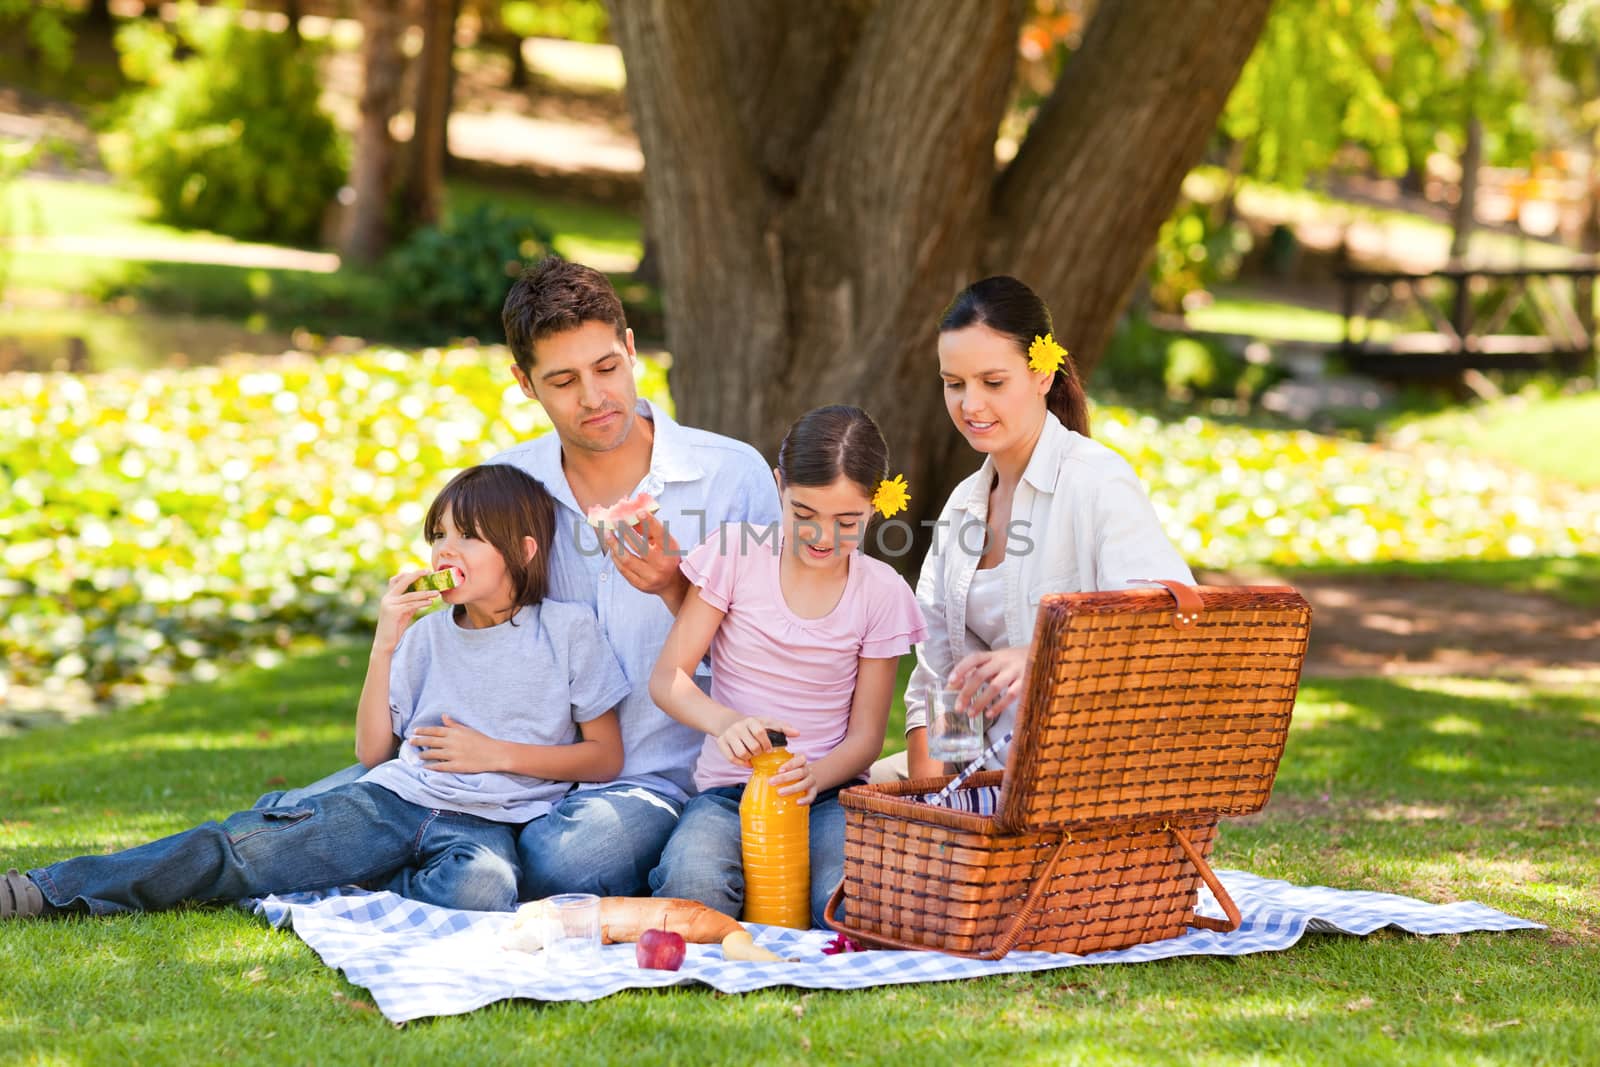 Lovely family picnicking in the park during the summer